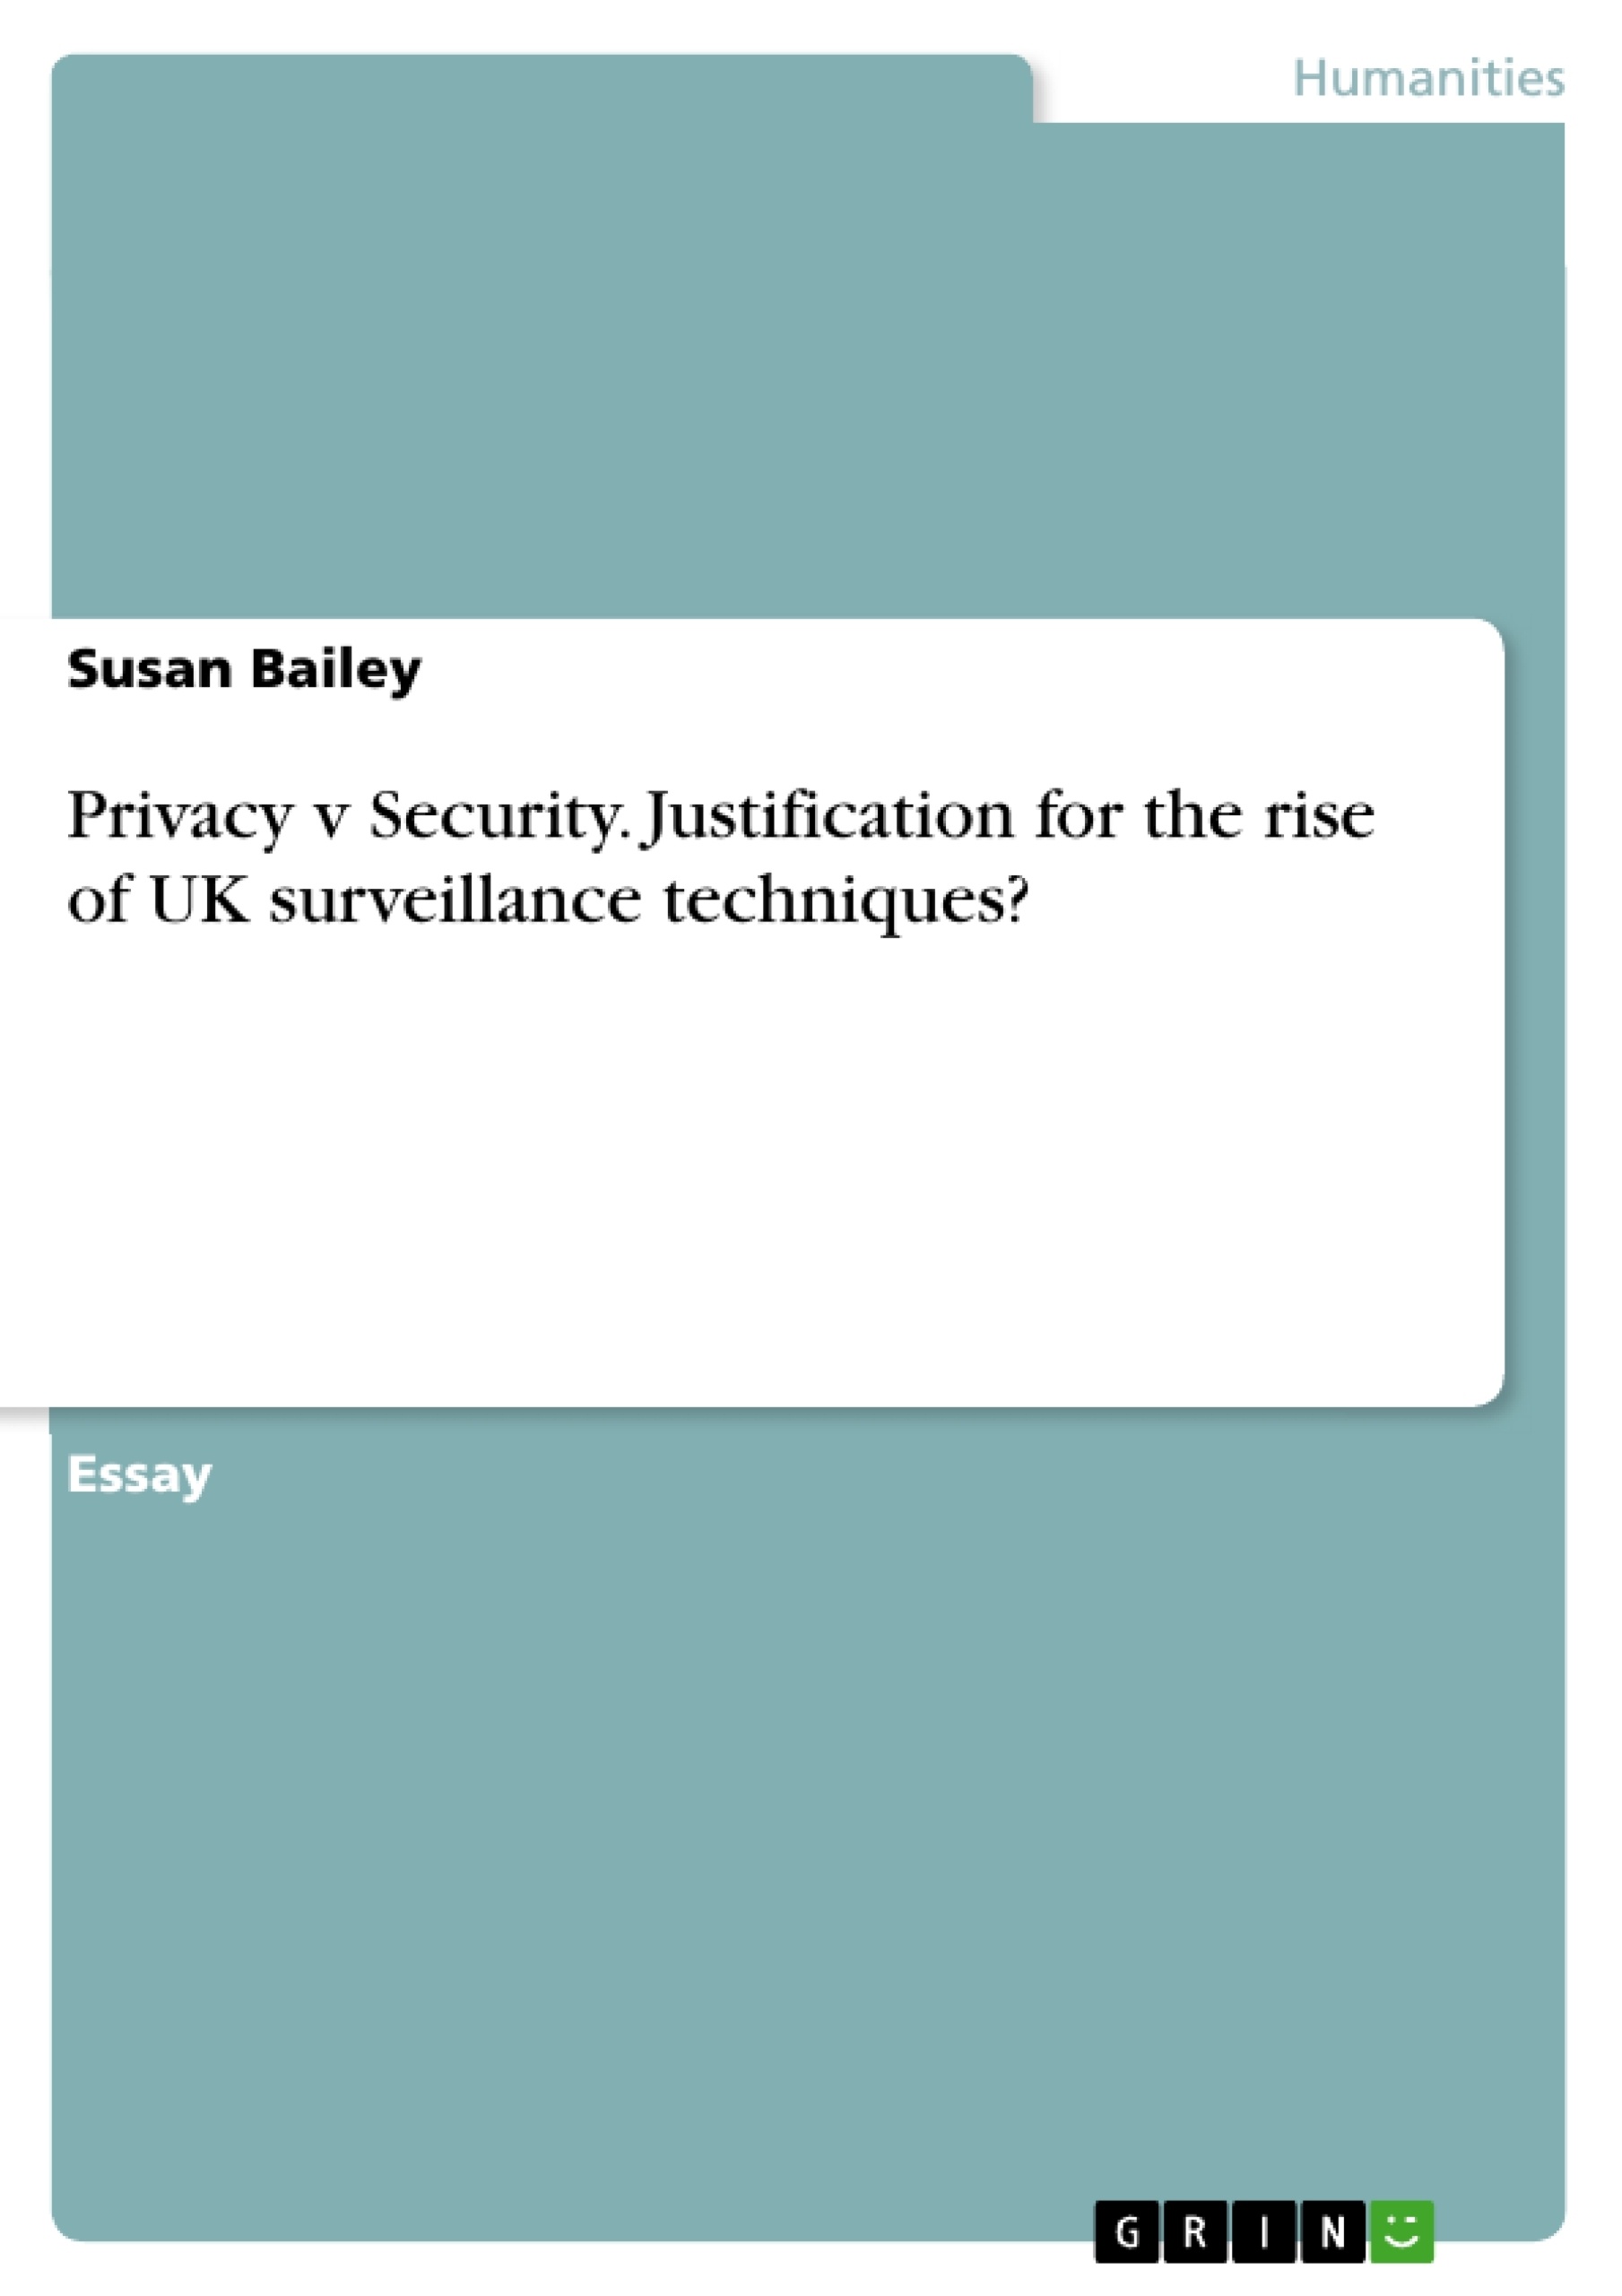 Title: Privacy v Security. Justification for the rise of UK surveillance techniques?